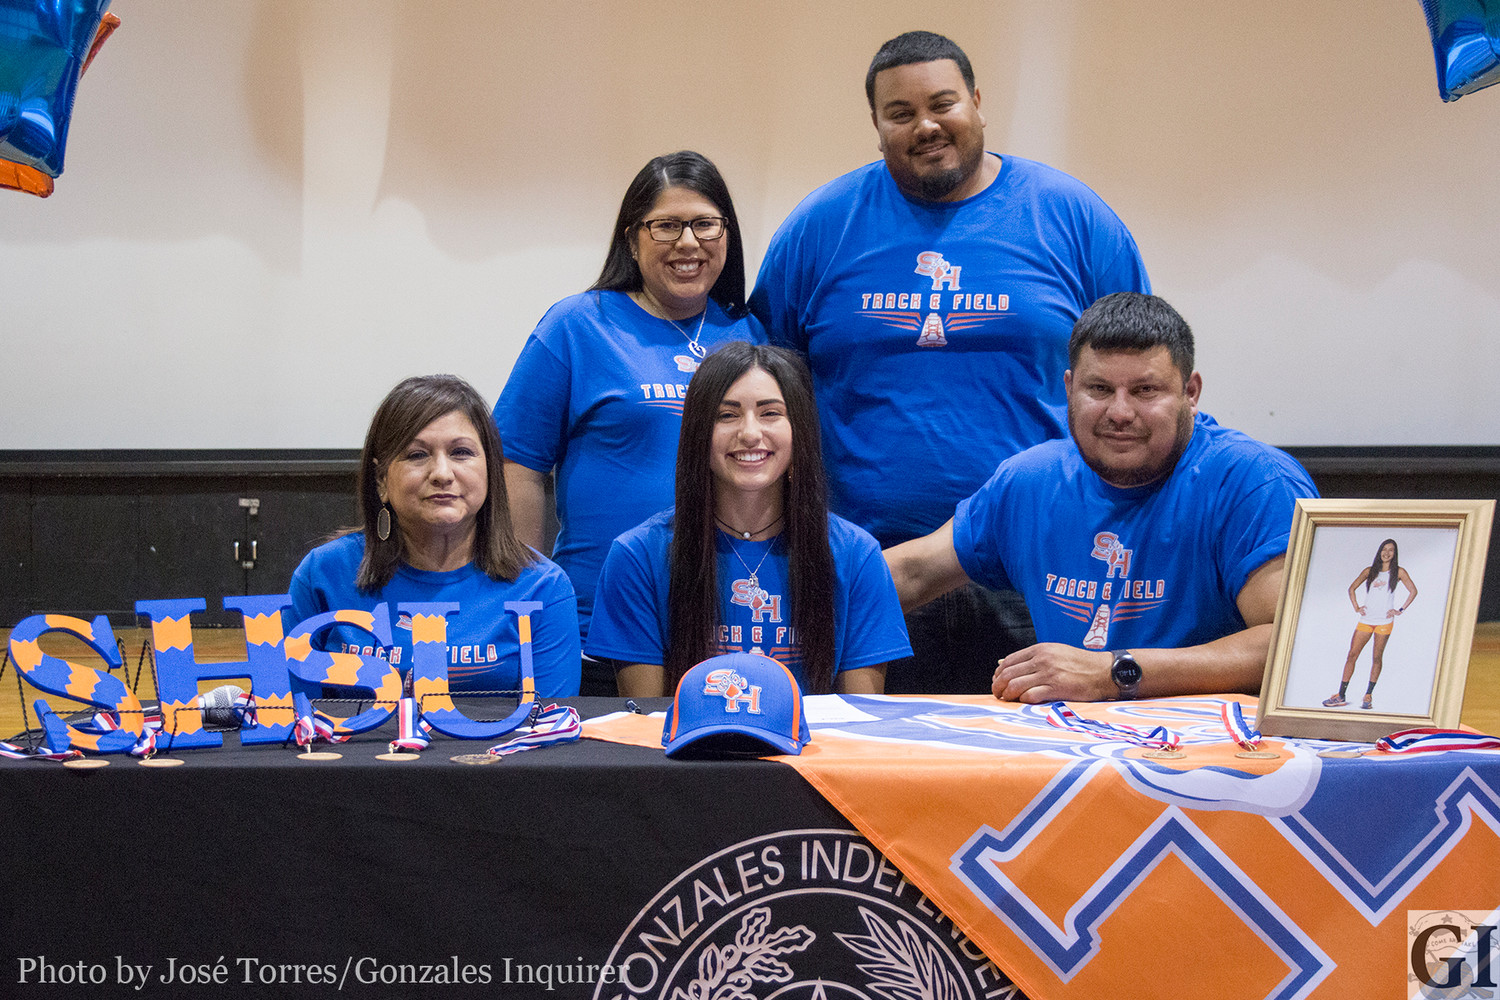 Haley Garza signed on Wednesday to Sam Houston State University to continue her long-distance running career.